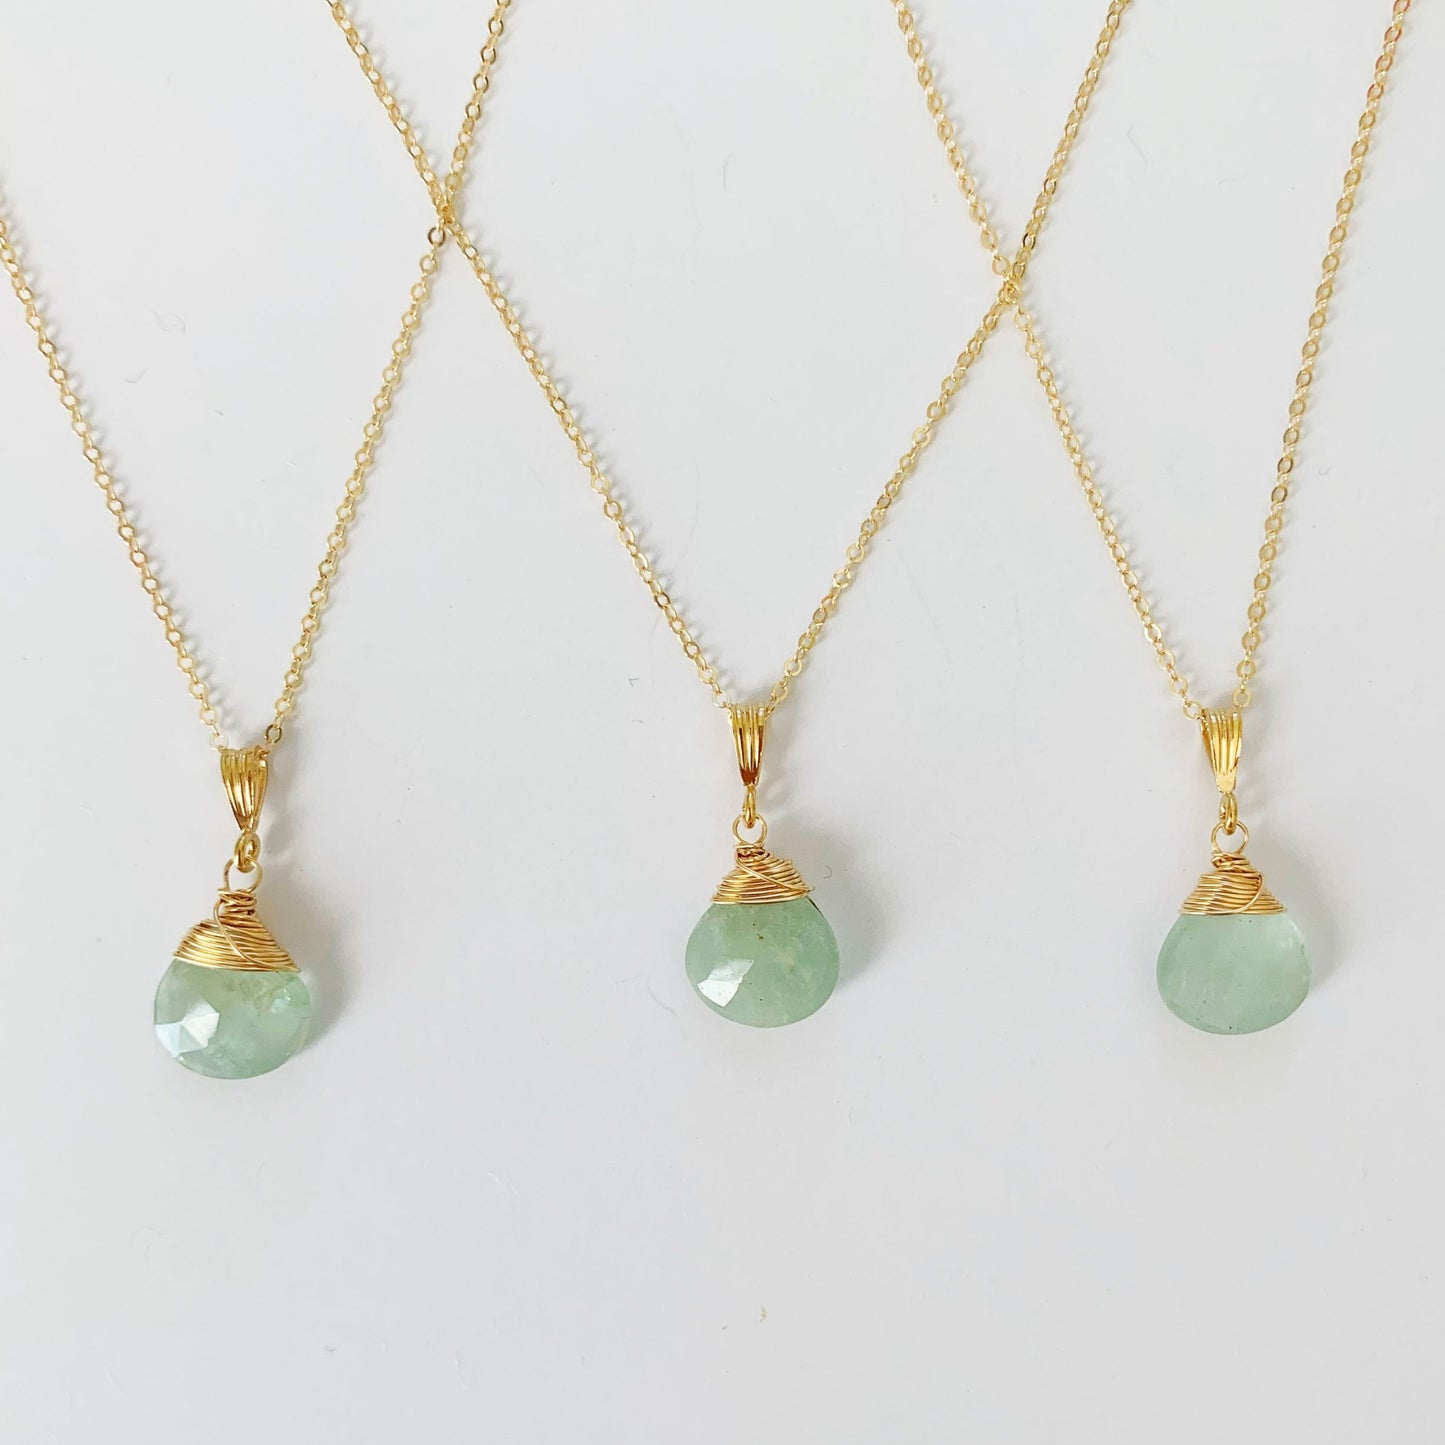 a photograph of 3 mermaids and madeleines raindrop necklaces created from aquamarine briolettes and 14k gold filled wire, chain and findings photographed on a white surface